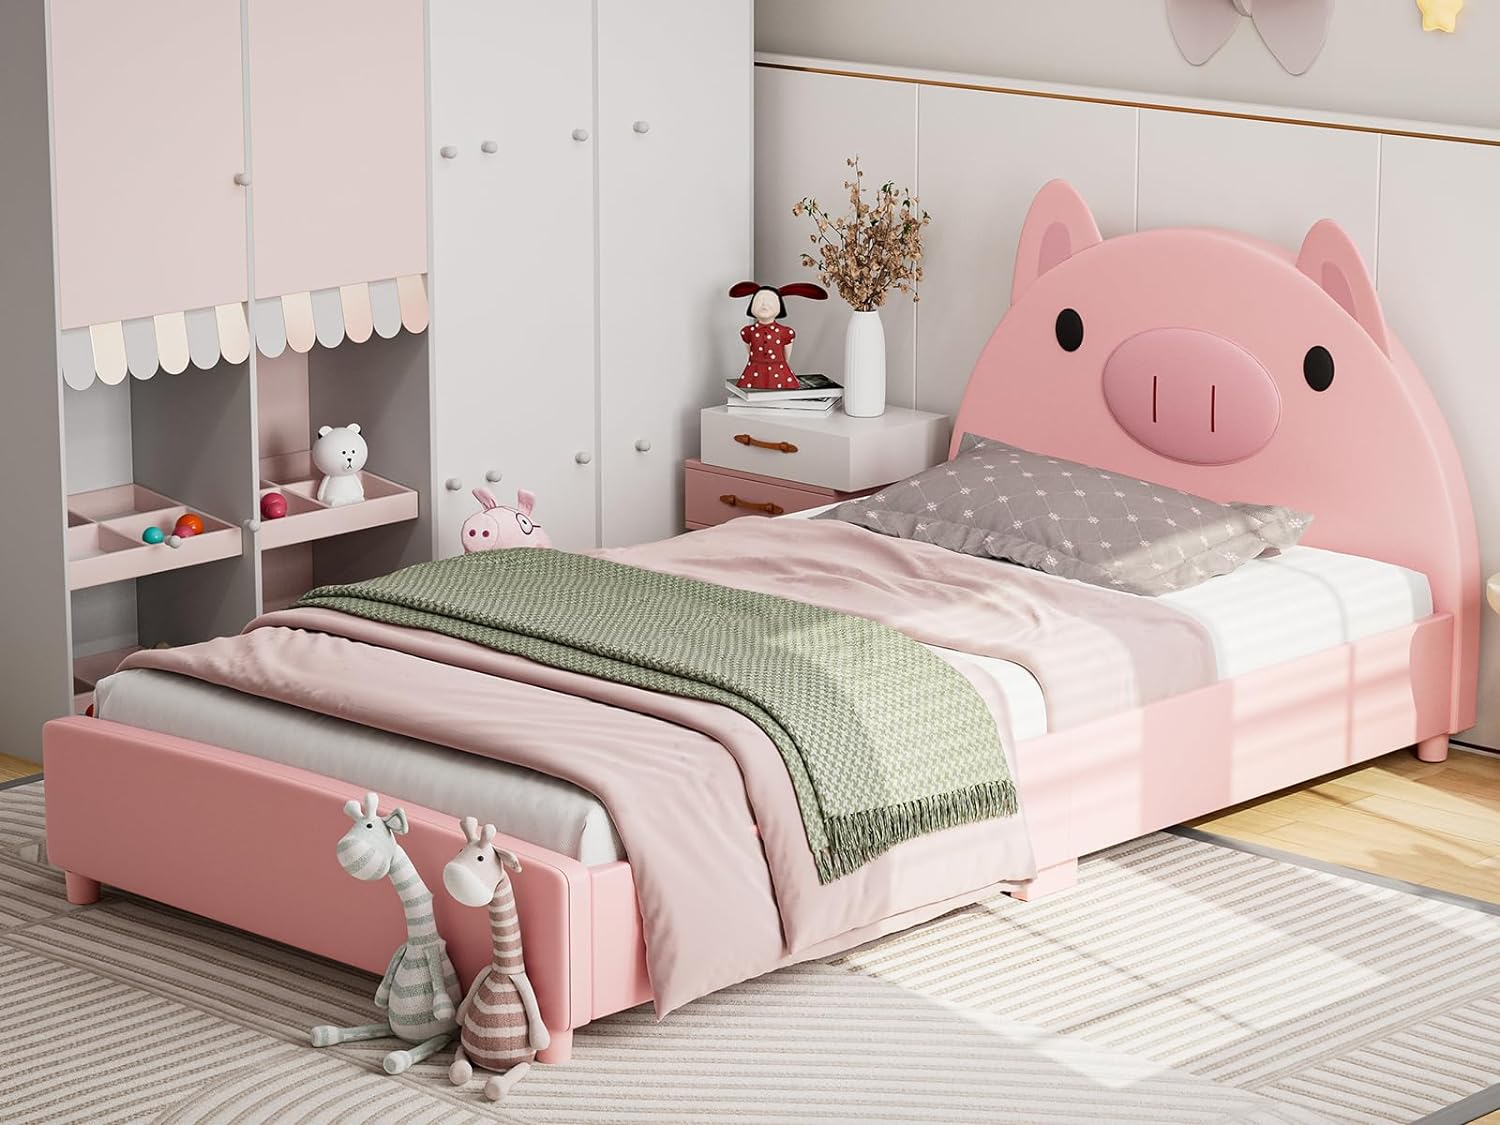 IKIFLY Twin Bed Frames for Kids, Children Upholstered Twin Platform Bed Frame with Headboard, Solid Wood Slats, Toddler Bed for Boys & Girls, Teens, No Box Spring Needed - Pig Design